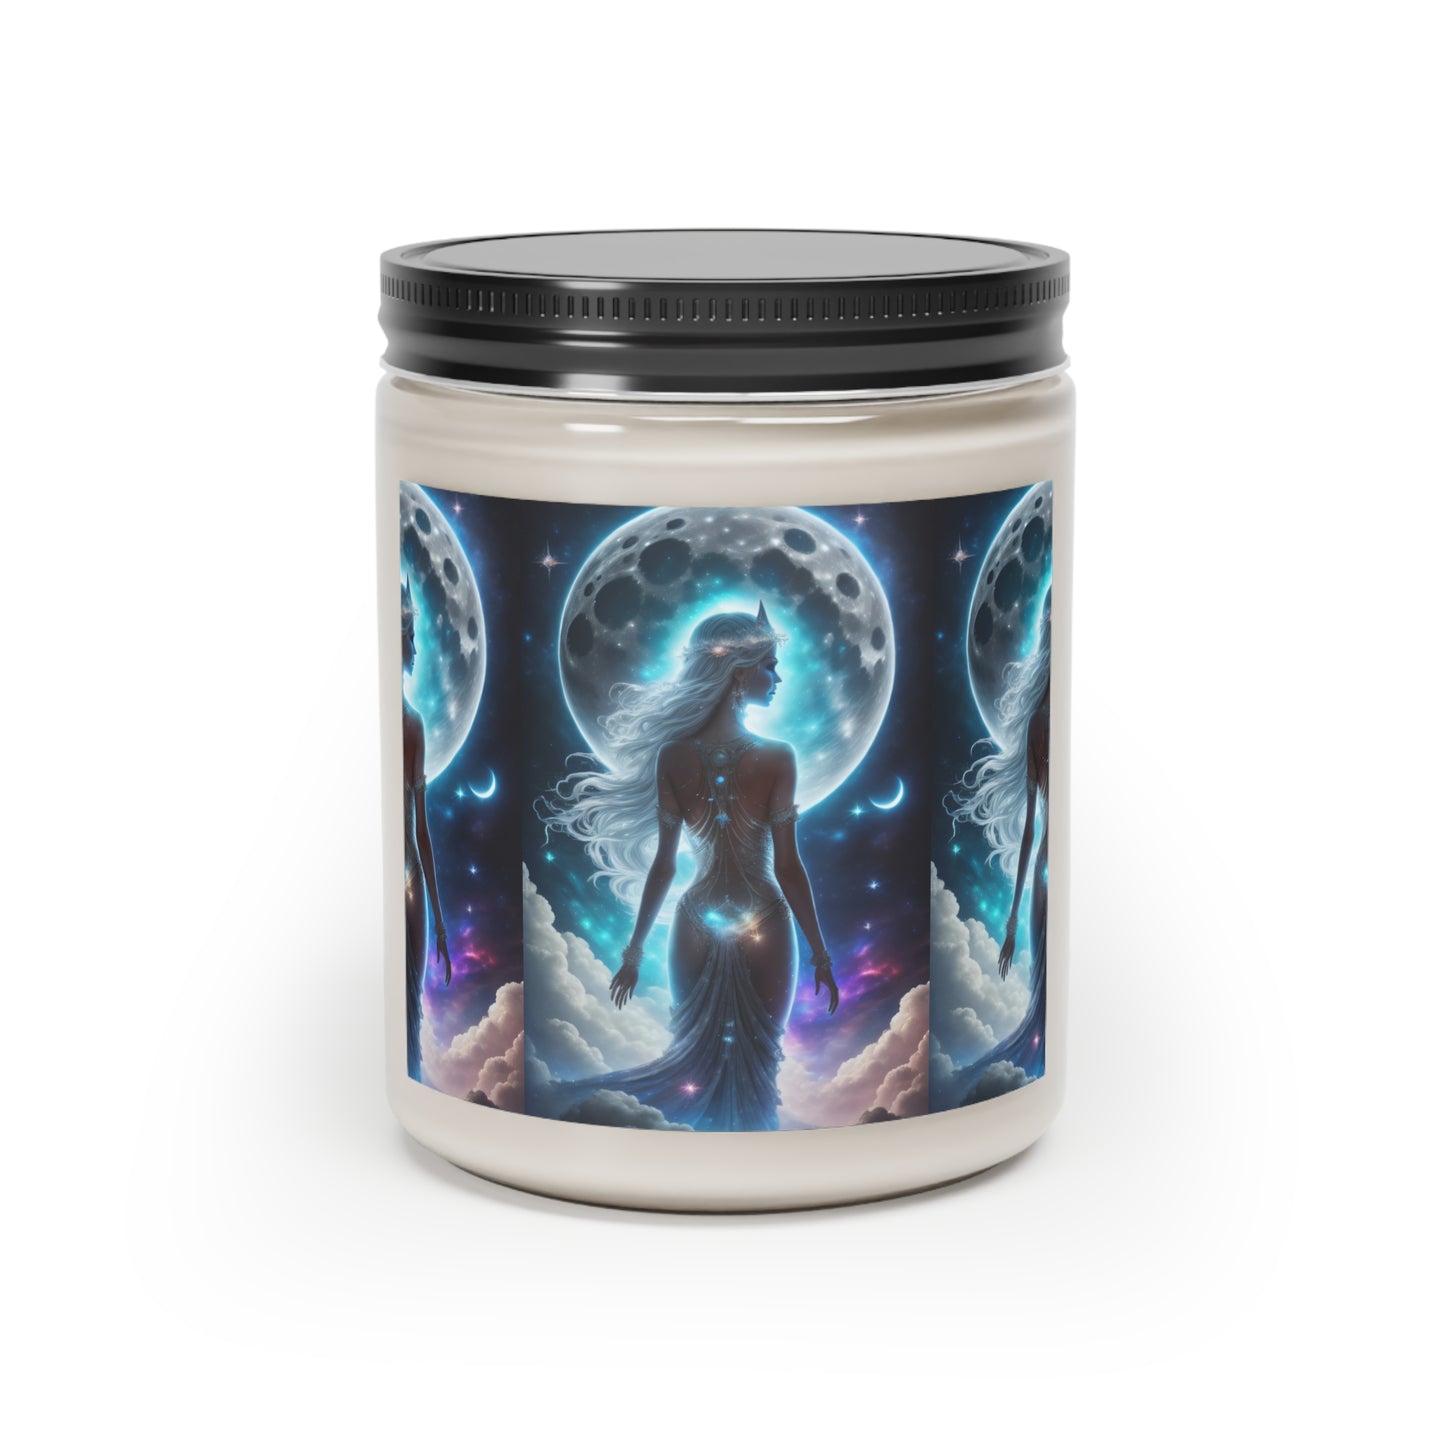 Moon Goddess Scented Candle, 9oz